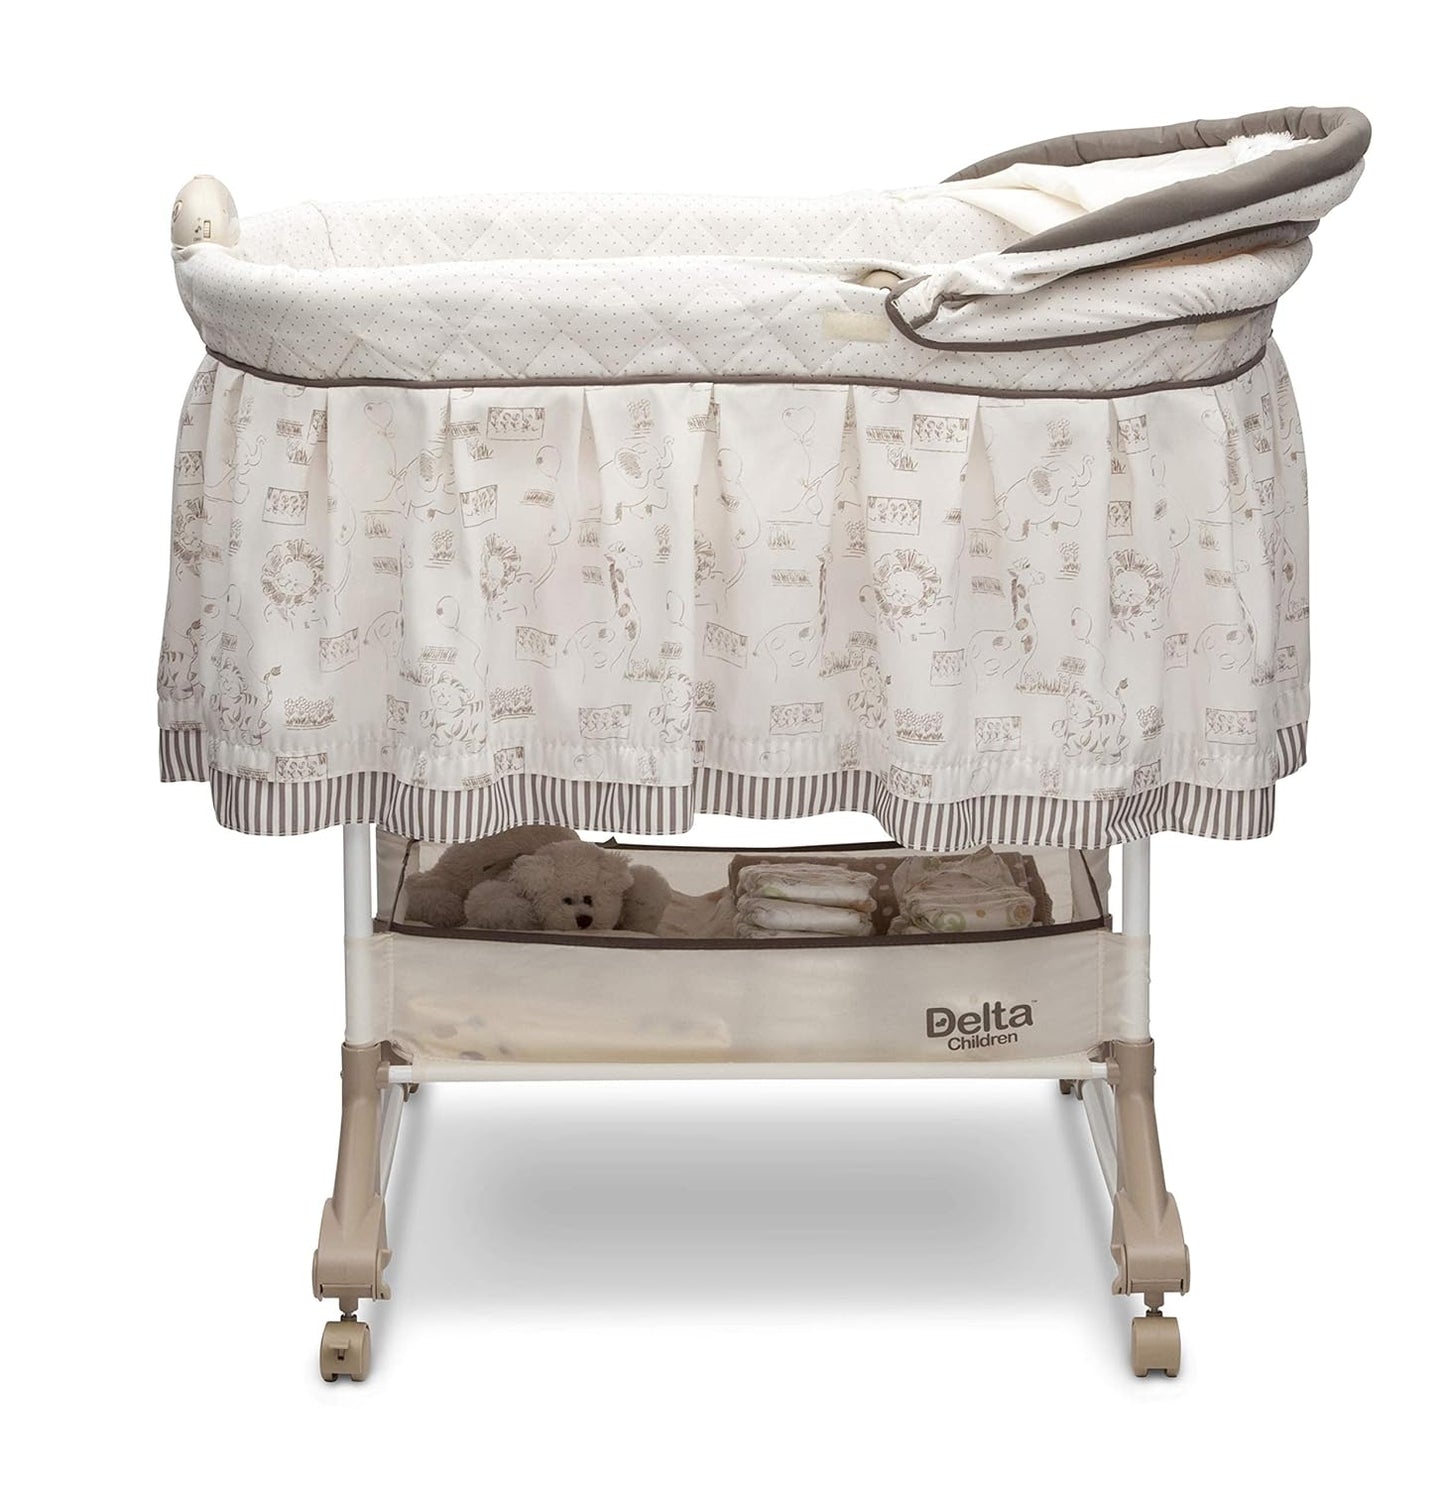 Rocking Bedside Bassinet - Portable Crib with Lights Sounds and Vibrations, Play Time Jungle - Design By Technique